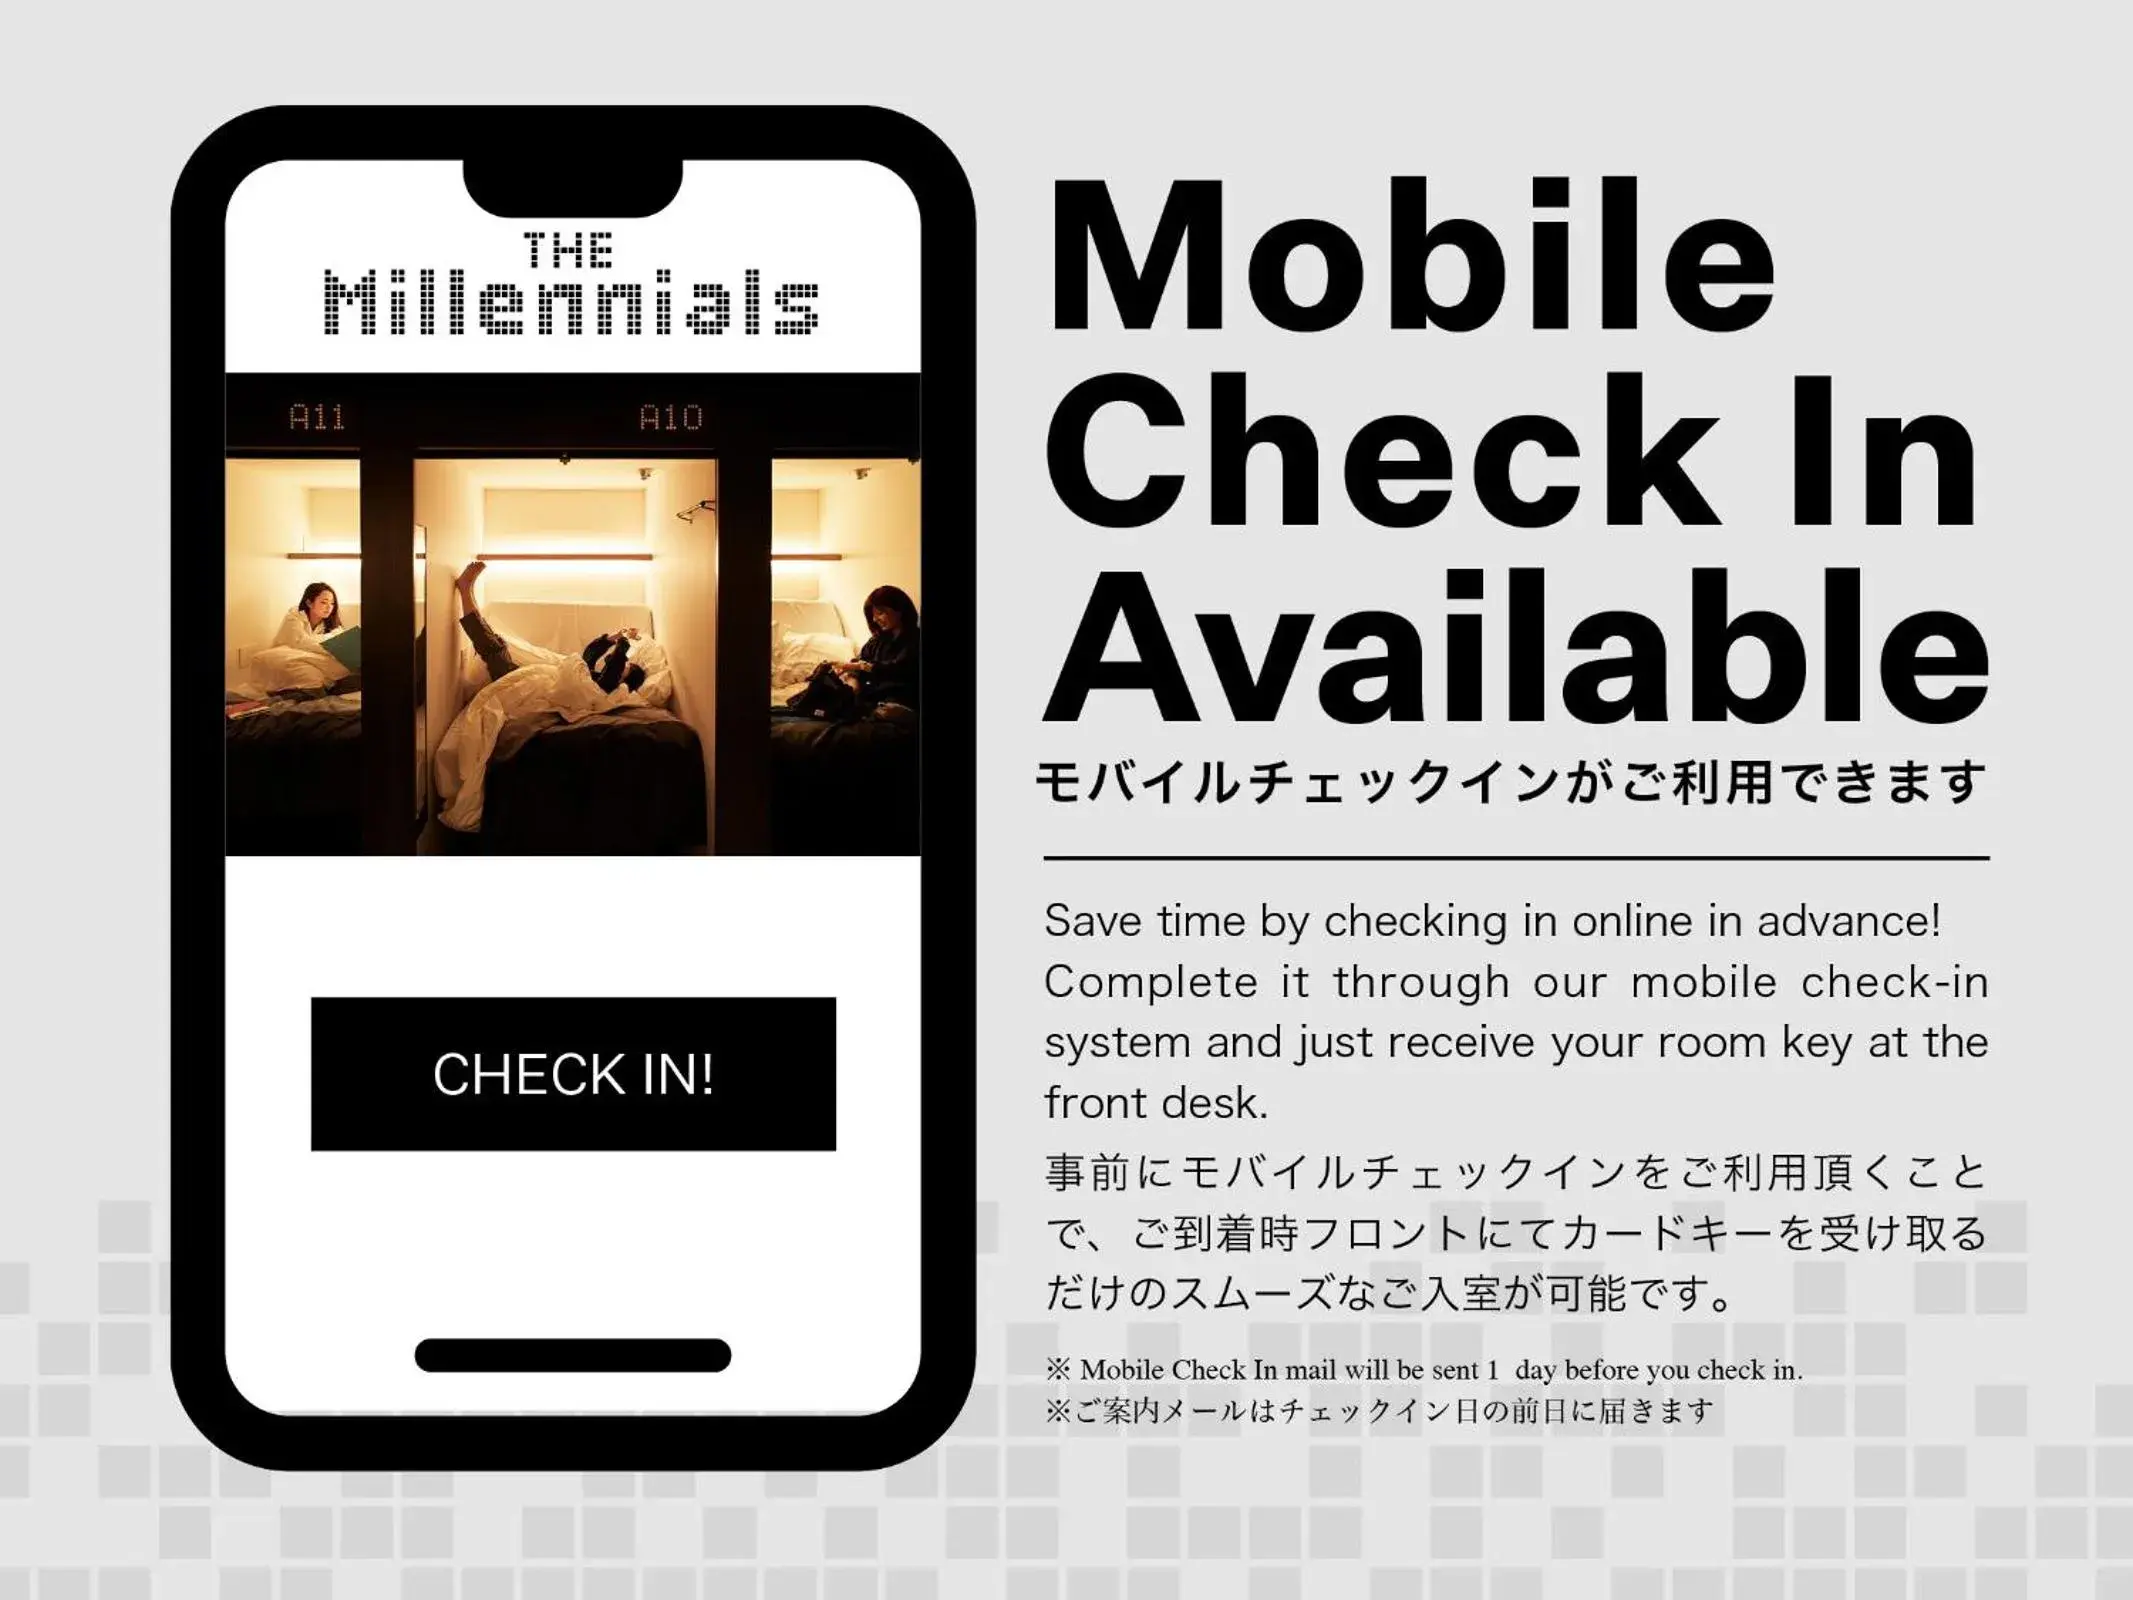 Text overlay in The Millennials Kyoto